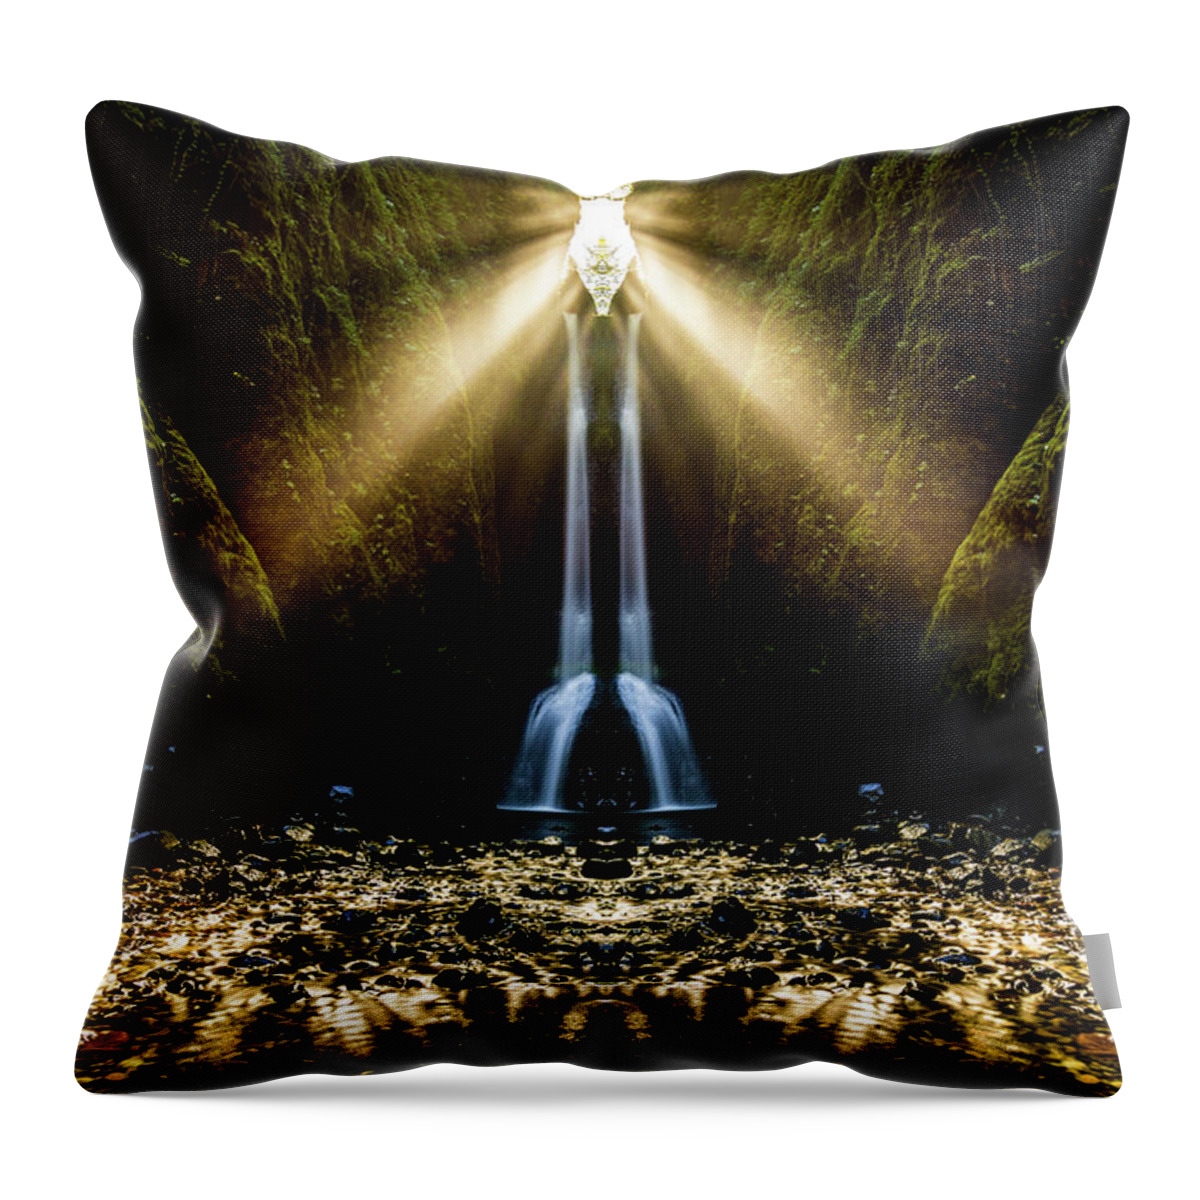 Natural Throw Pillow featuring the digital art Oneonta Falls Reflection by Pelo Blanco Photo